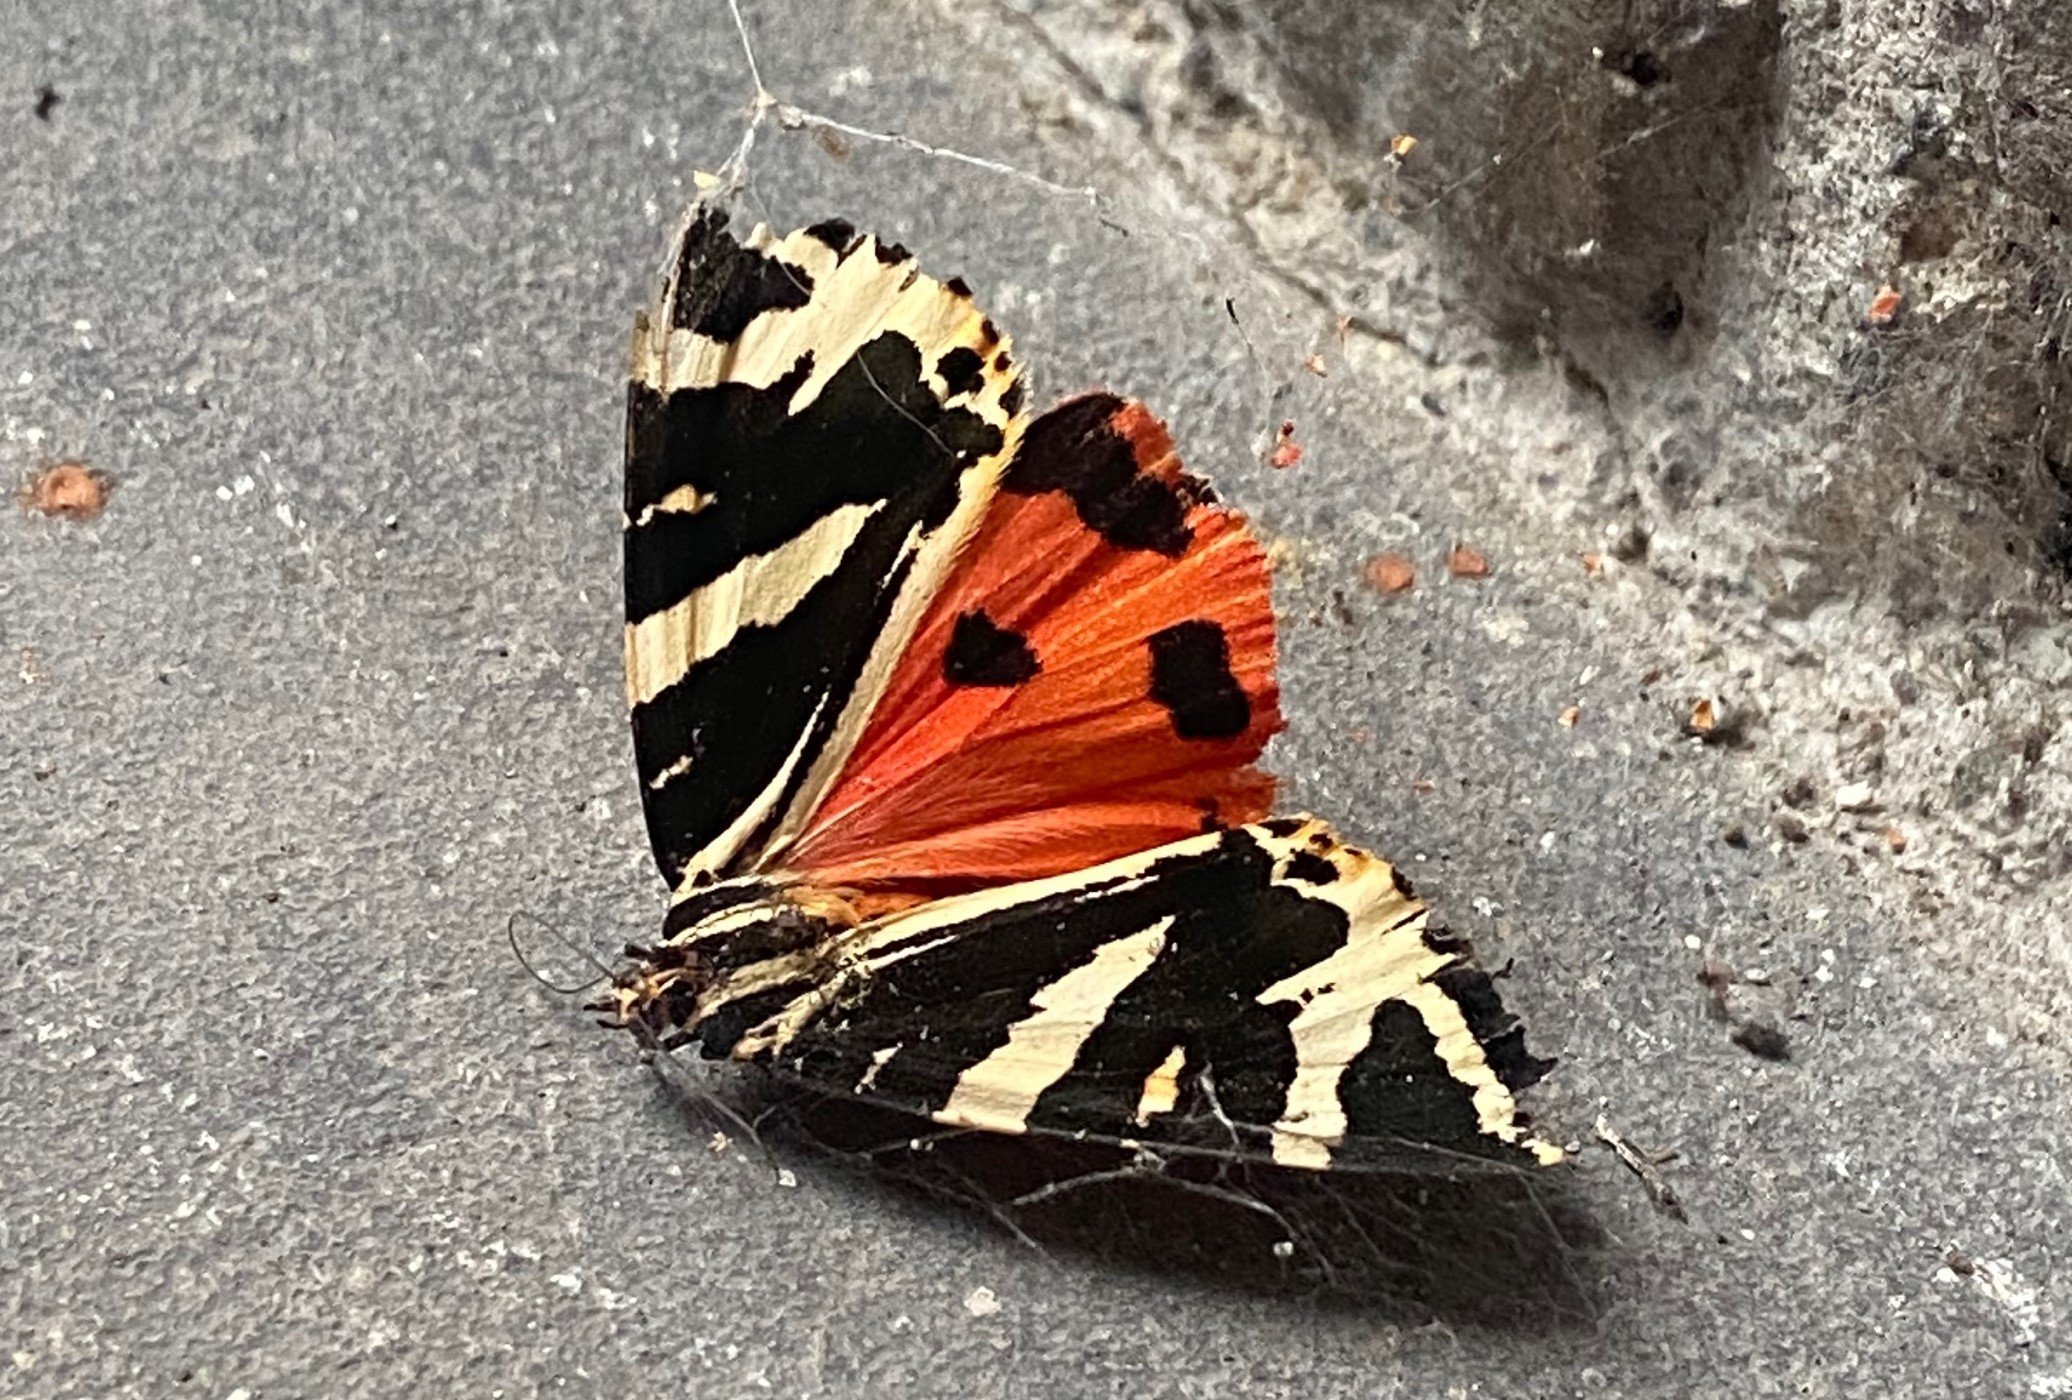 Image of a Jersey Tiger Moth on a concrete floor